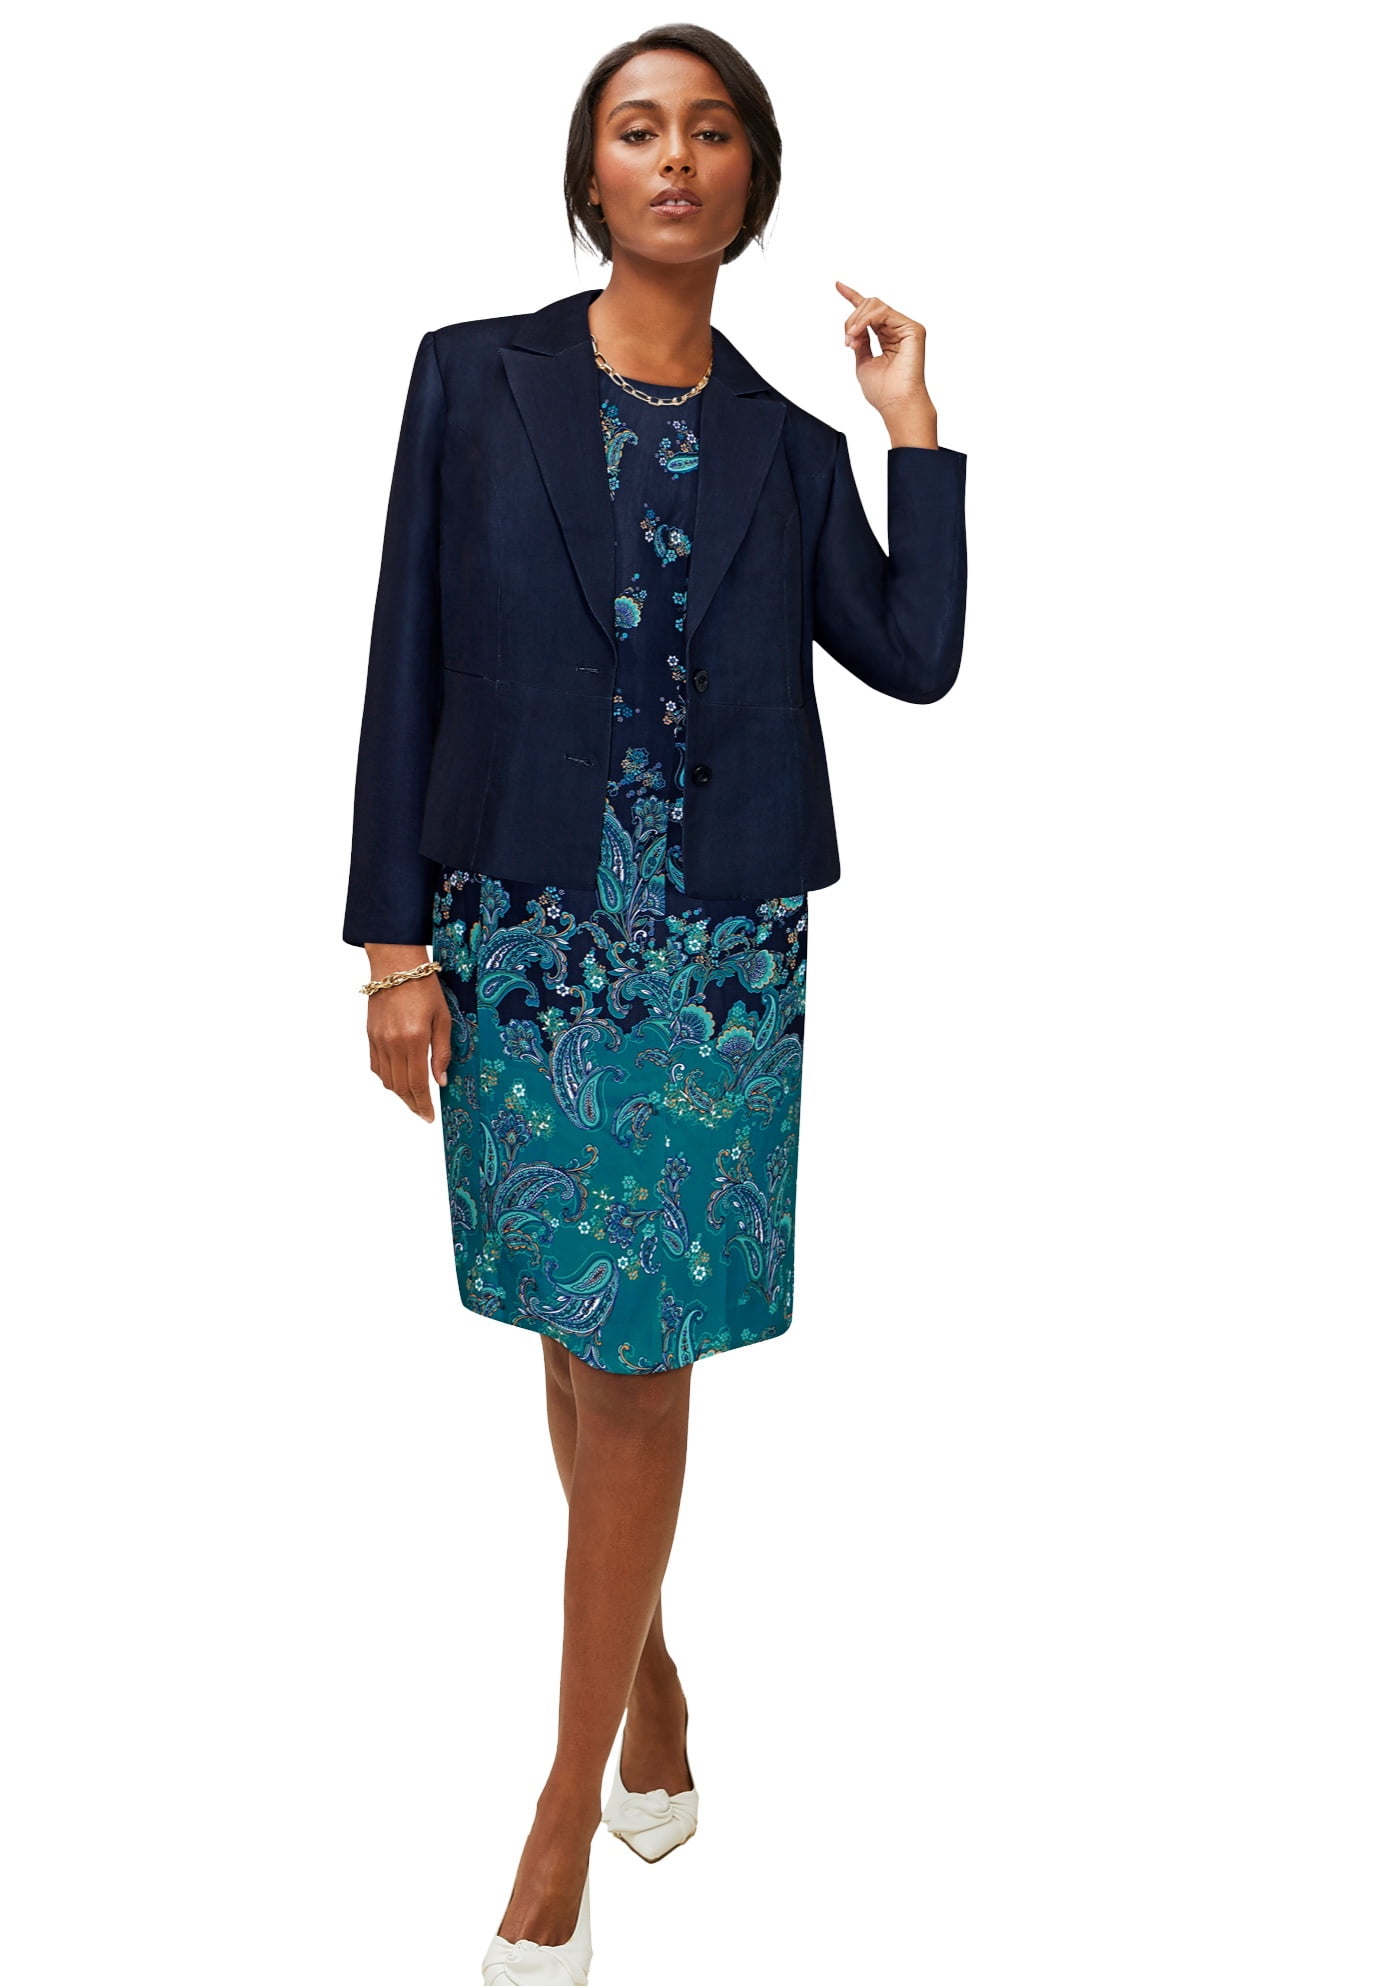 Jessica London Women's Plus Size Two Piece Single Breasted Jacket Dress  Suit Outfit - 20 W, Teal Paisley Print Blue 